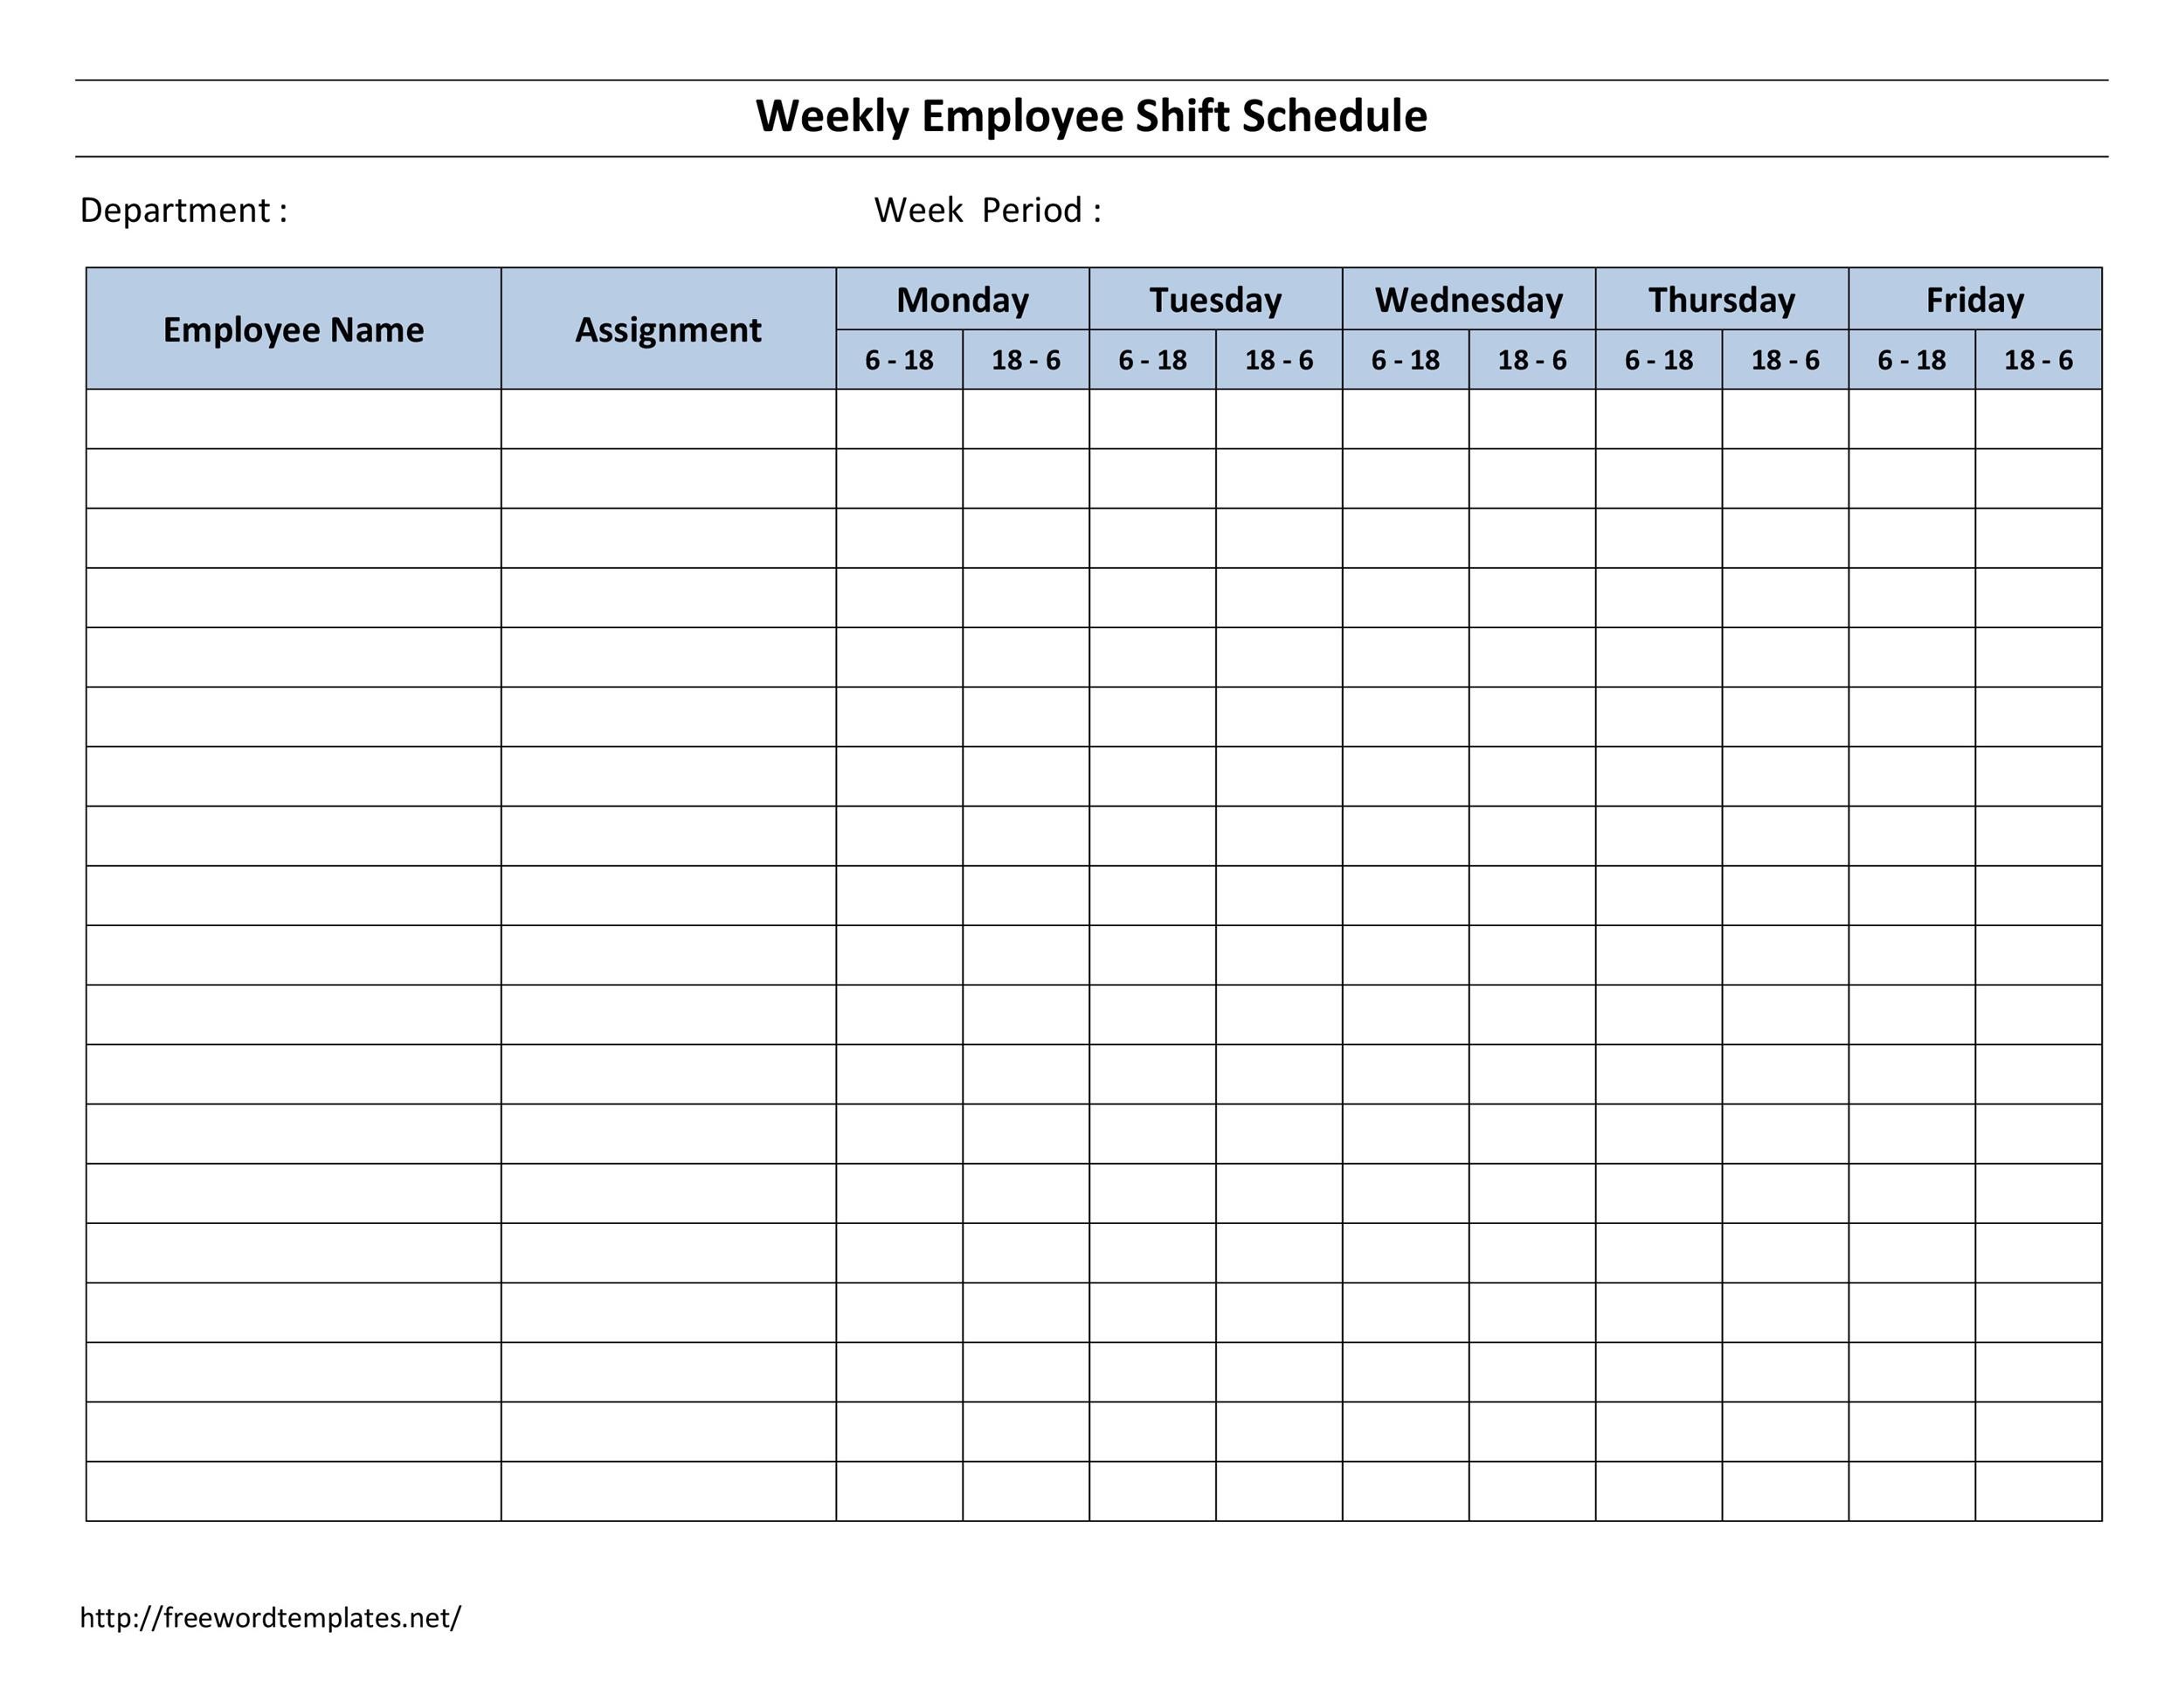 14 Dupont Shift Schedule Templats for any Company Free ᐅ TemplateLab